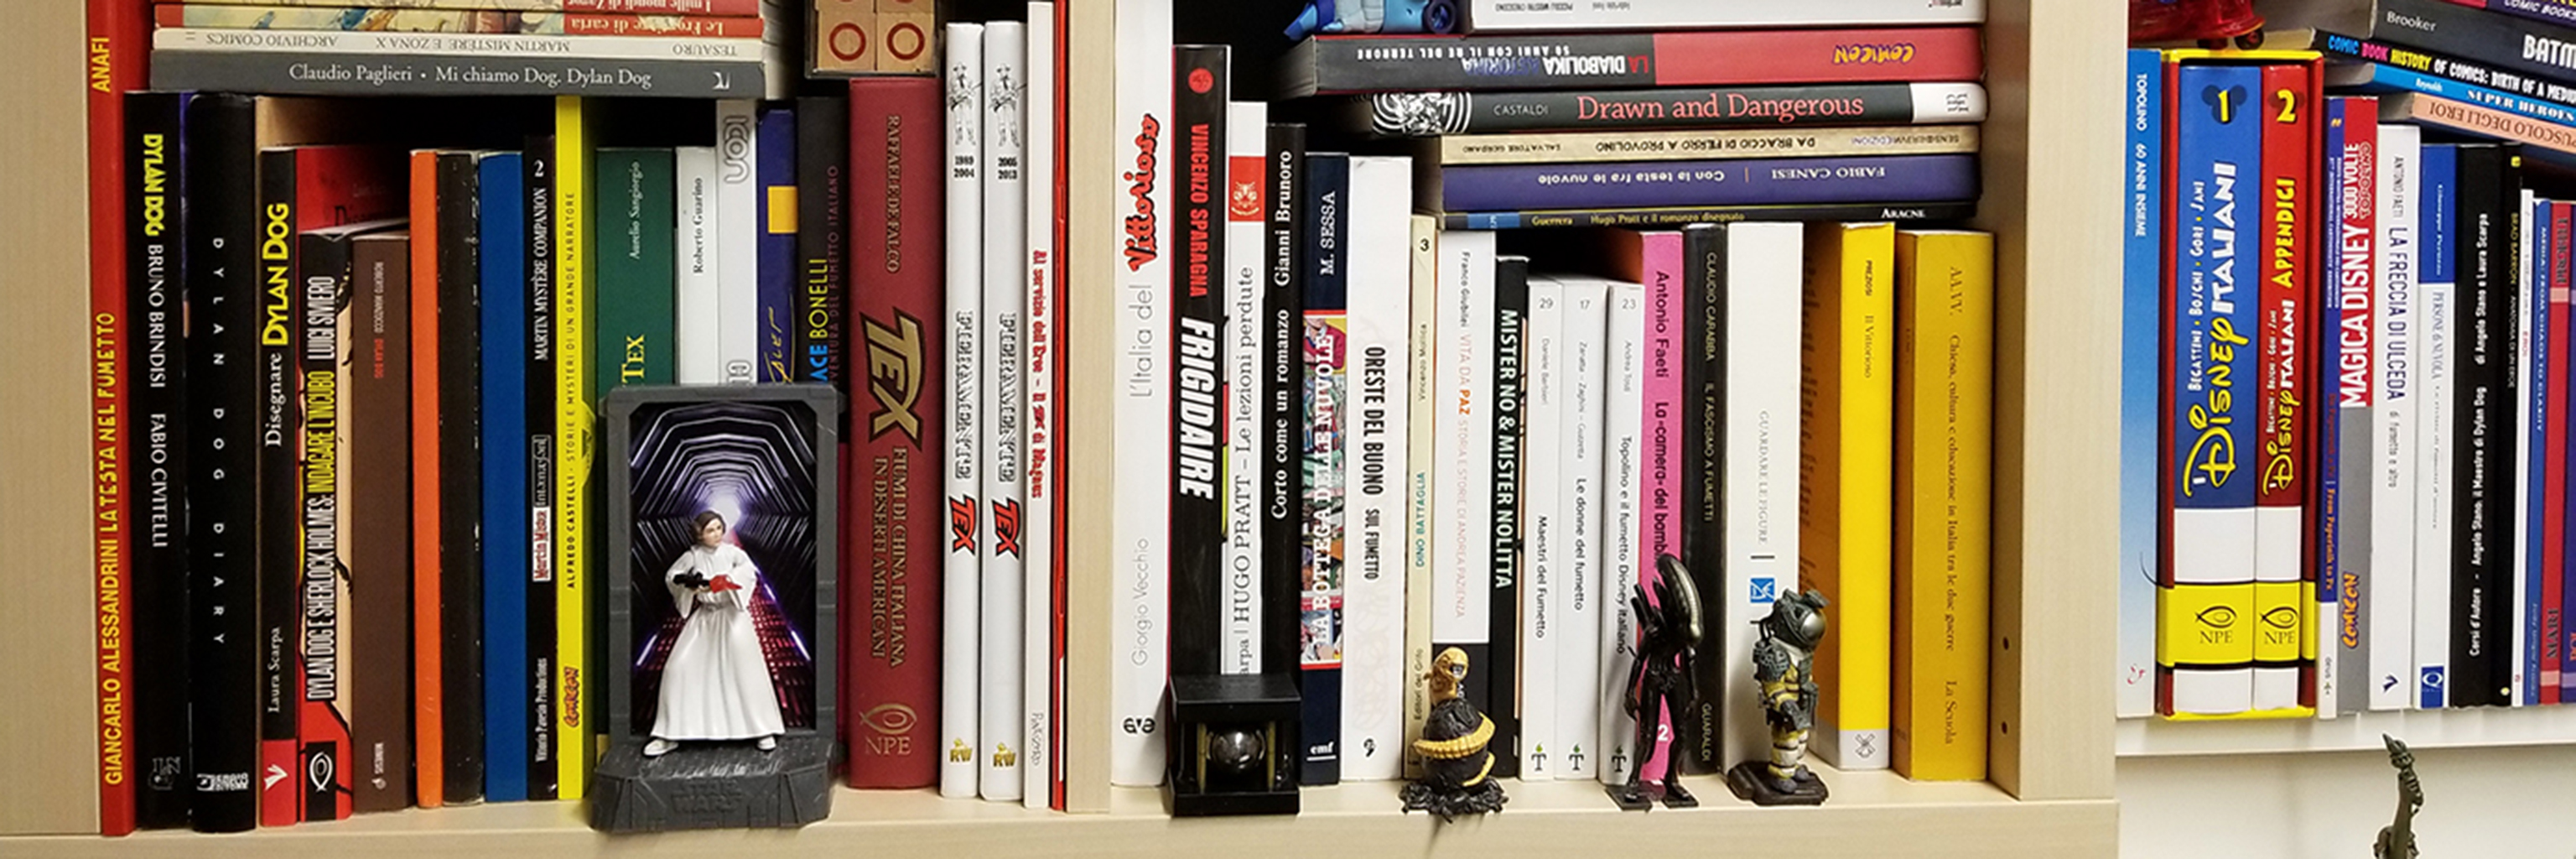 Image of a bookshelf full with books and action figures. 